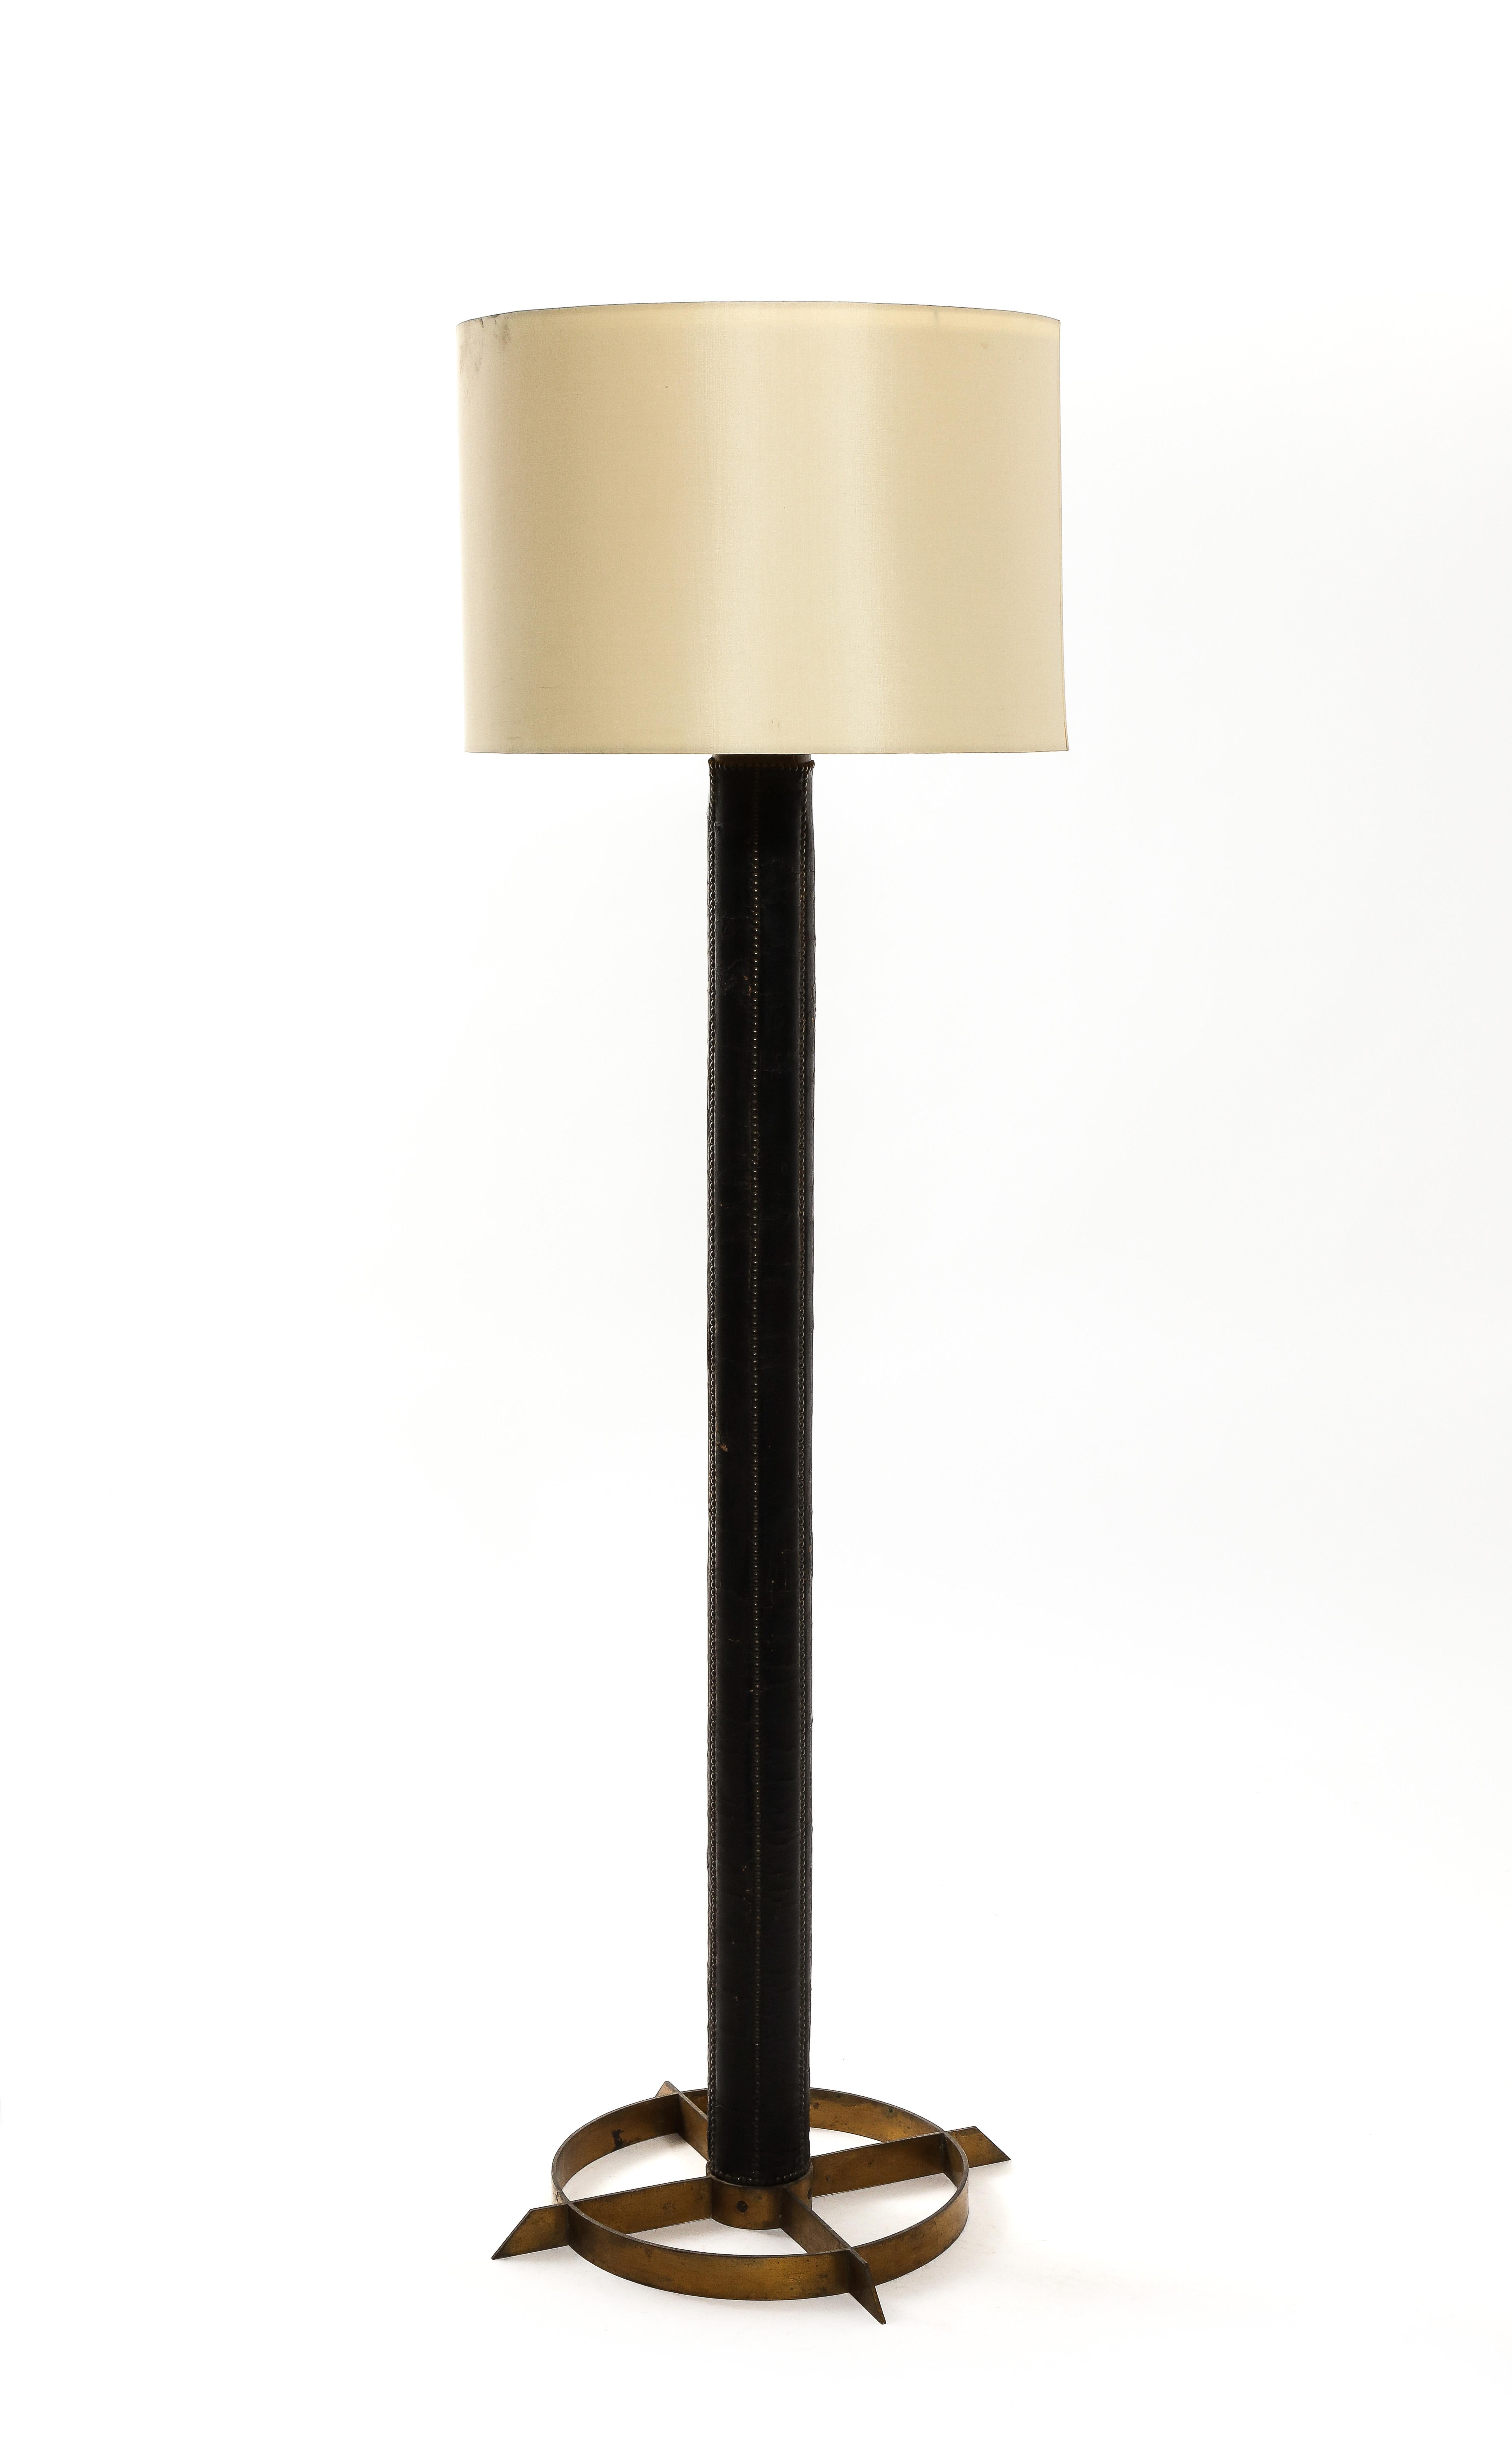 Nail Studded Leather Floor Lamp, France 1960s For Sale 6